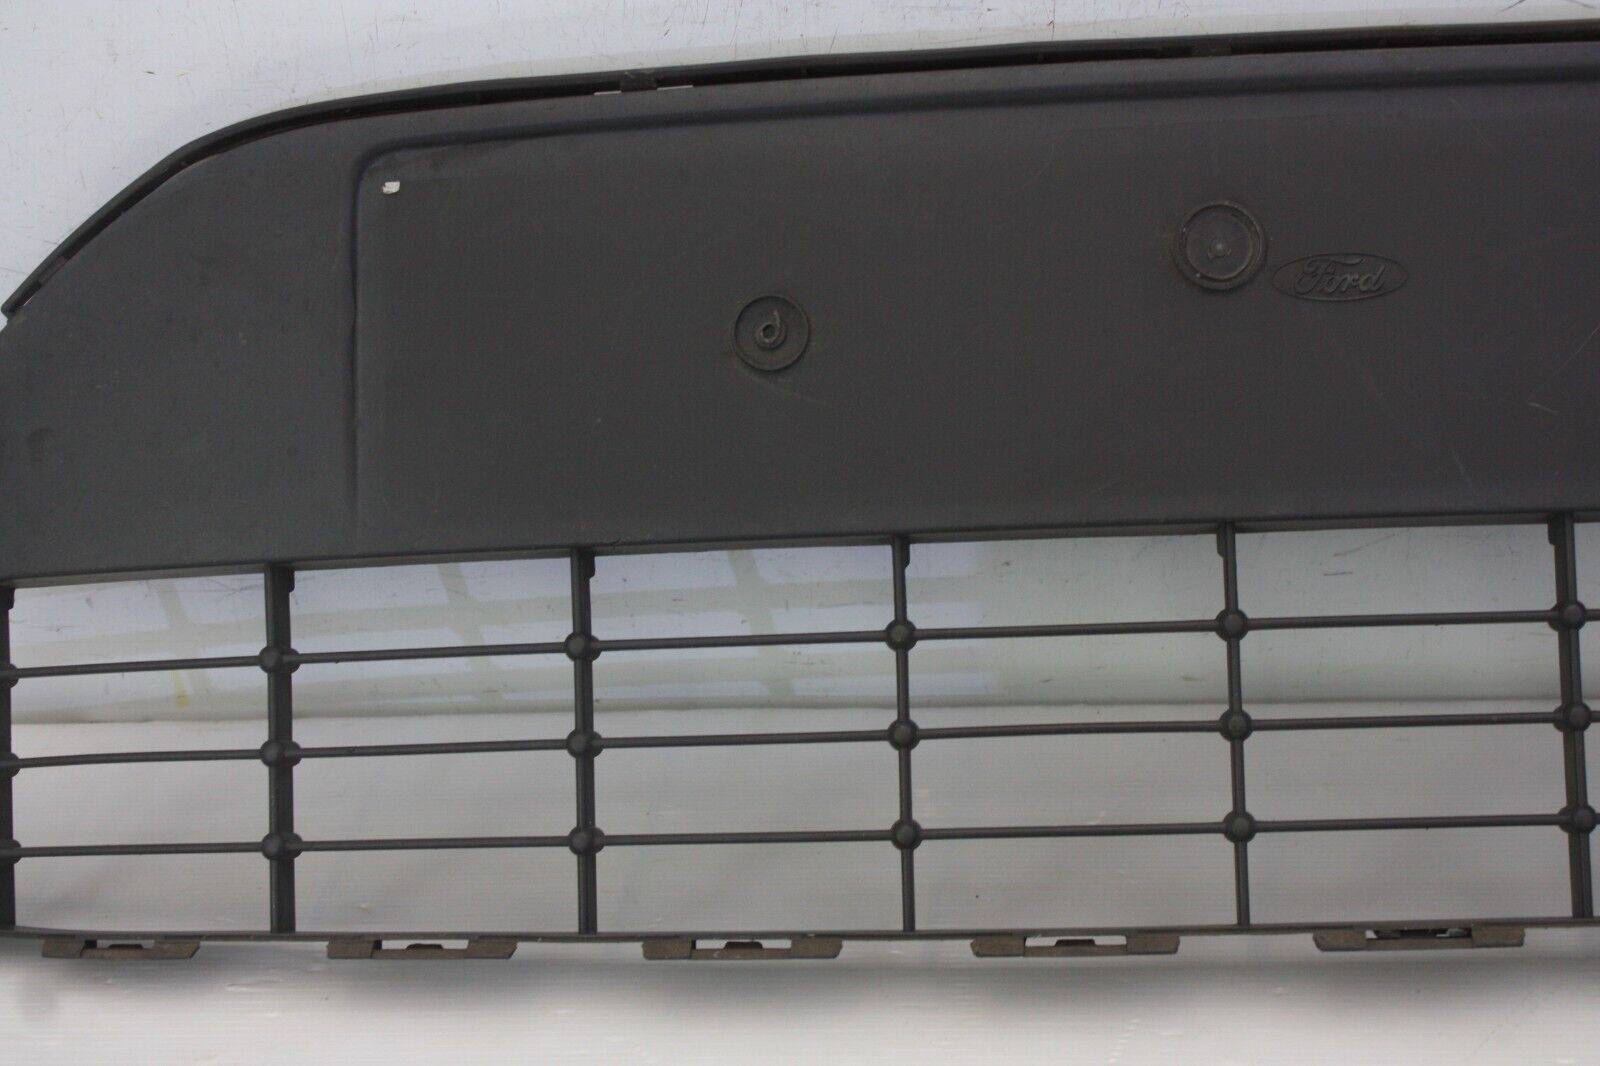 Ford-Focus-Front-Bumper-Grill-2008-TO-2011-8M51-17B968-BE-Genuine-SEE-PICS-175622452576-4